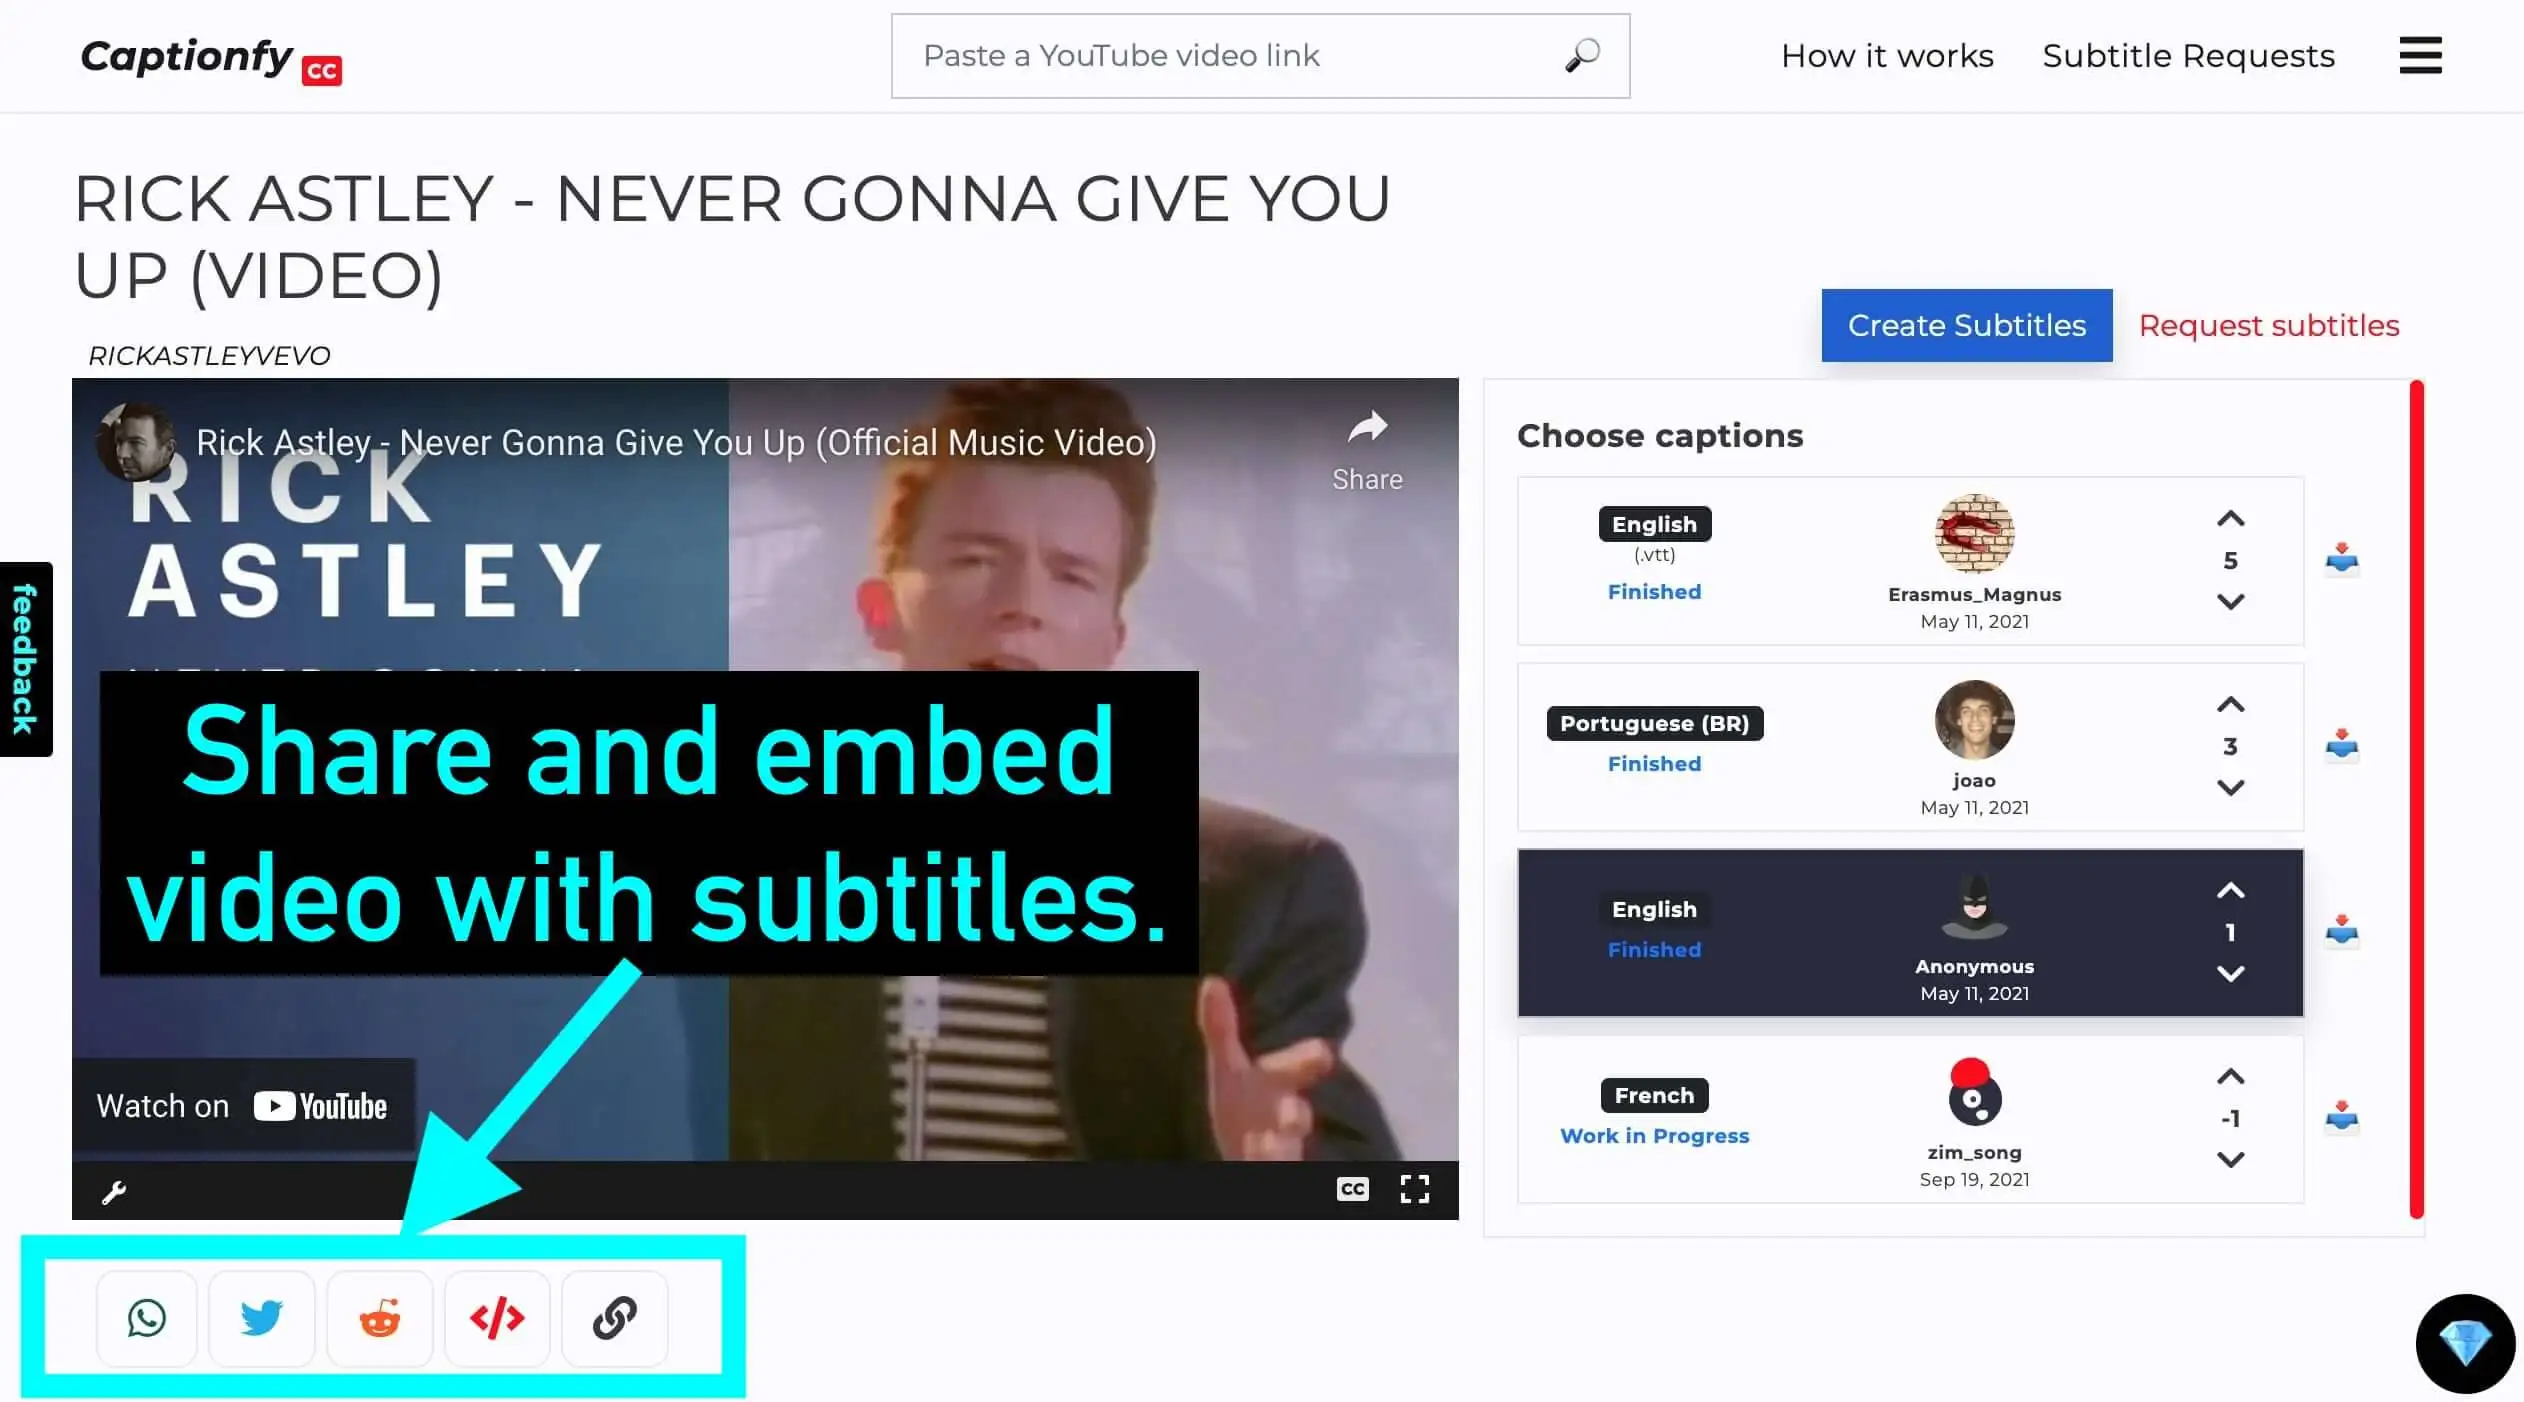 Captionfy embed video with subtitles